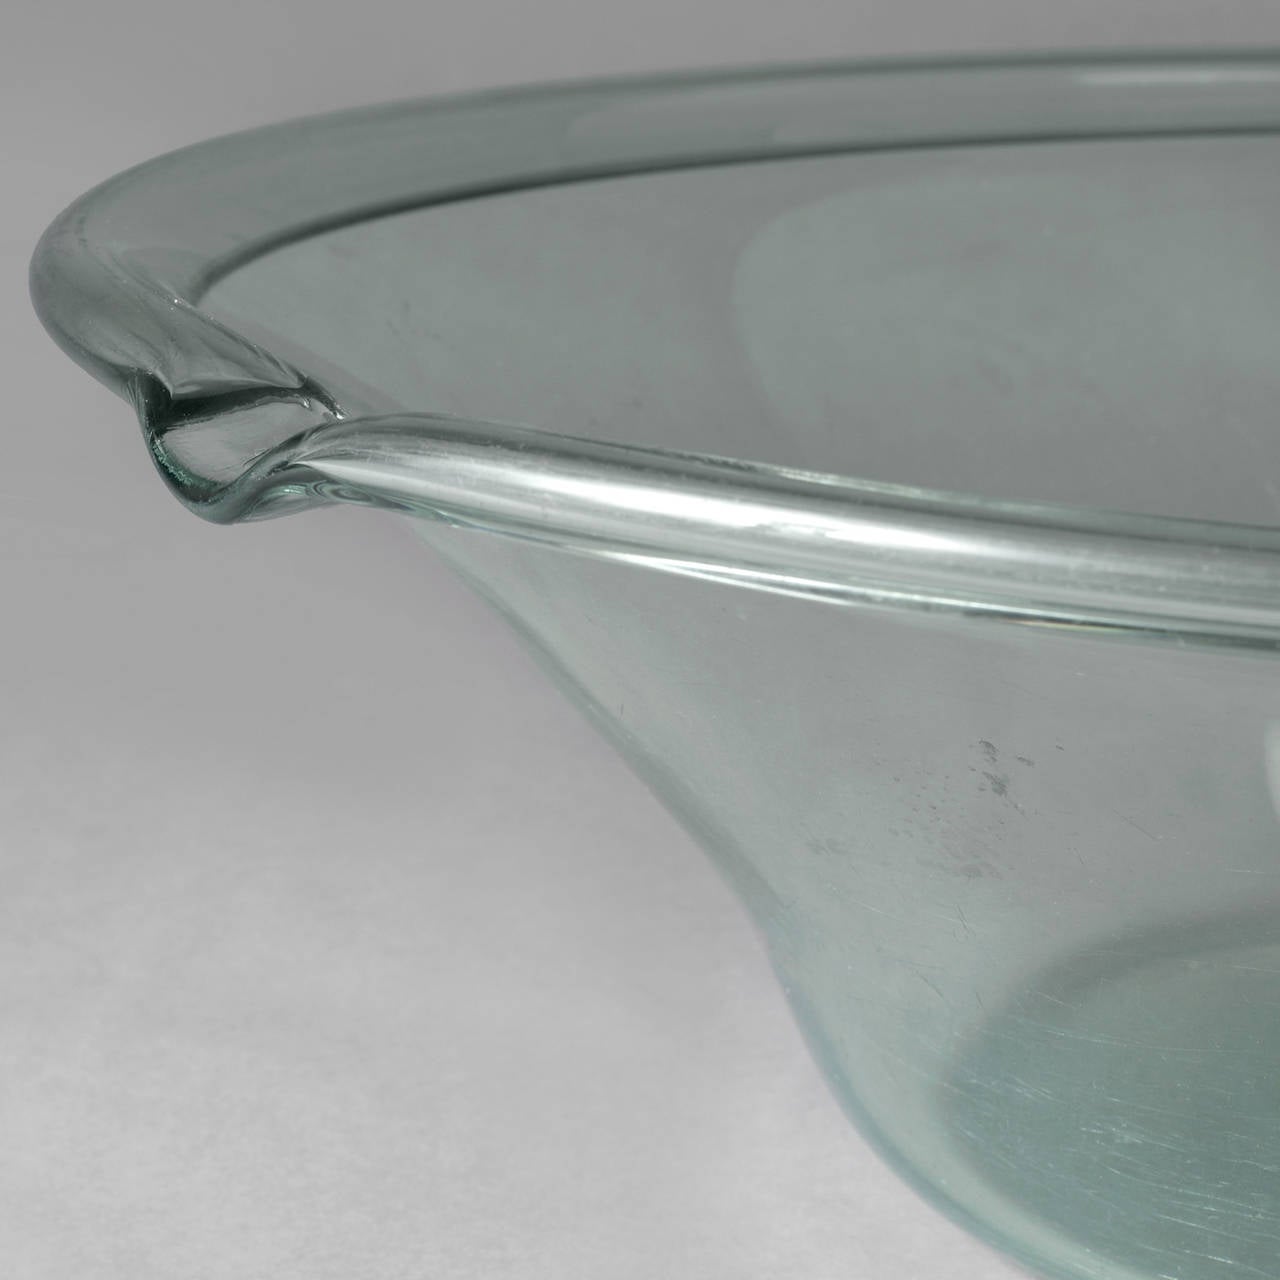 Probably French, early-mid-19th c.
Blown glass, aqua-marine color.
Excellent condition,customary wear to the base.
Commonly mistaken for American milk pans, this rare large scale example has a folded rim, pouring spout, and a polished pontil, and